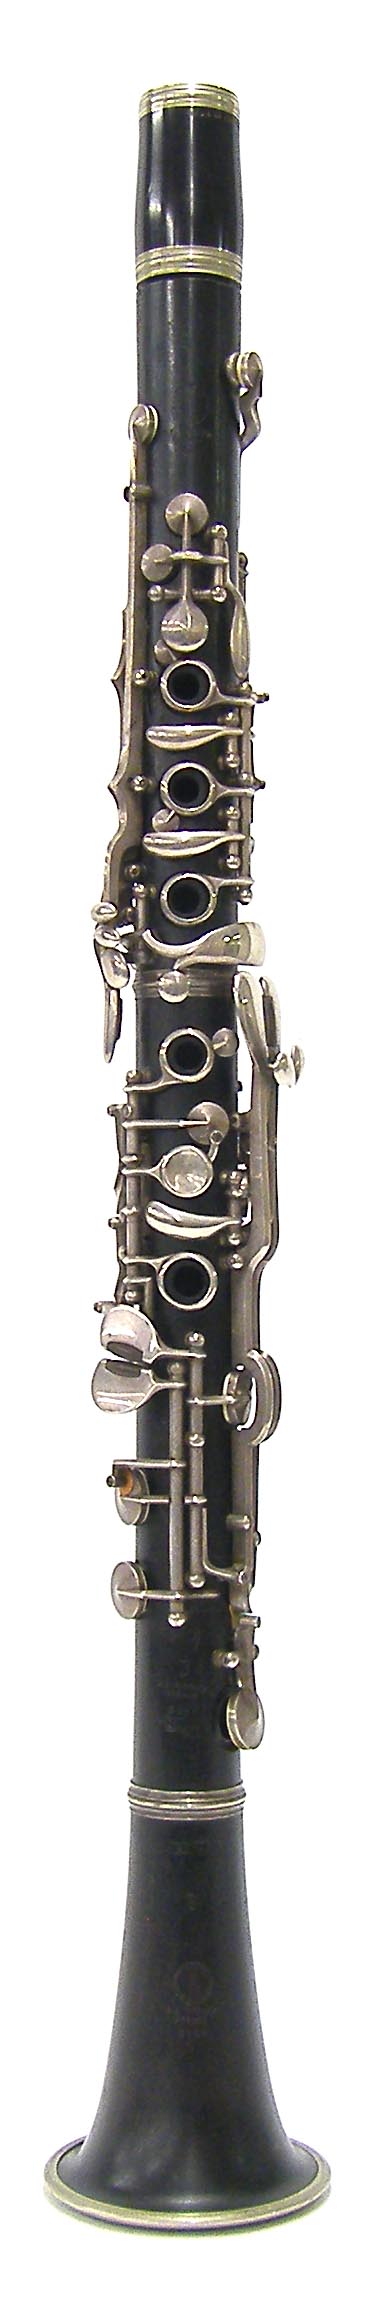 Oehler system blackwood clarinet in B= by A. E. Fischer, Bremen, circa 1840, silver plated mounts